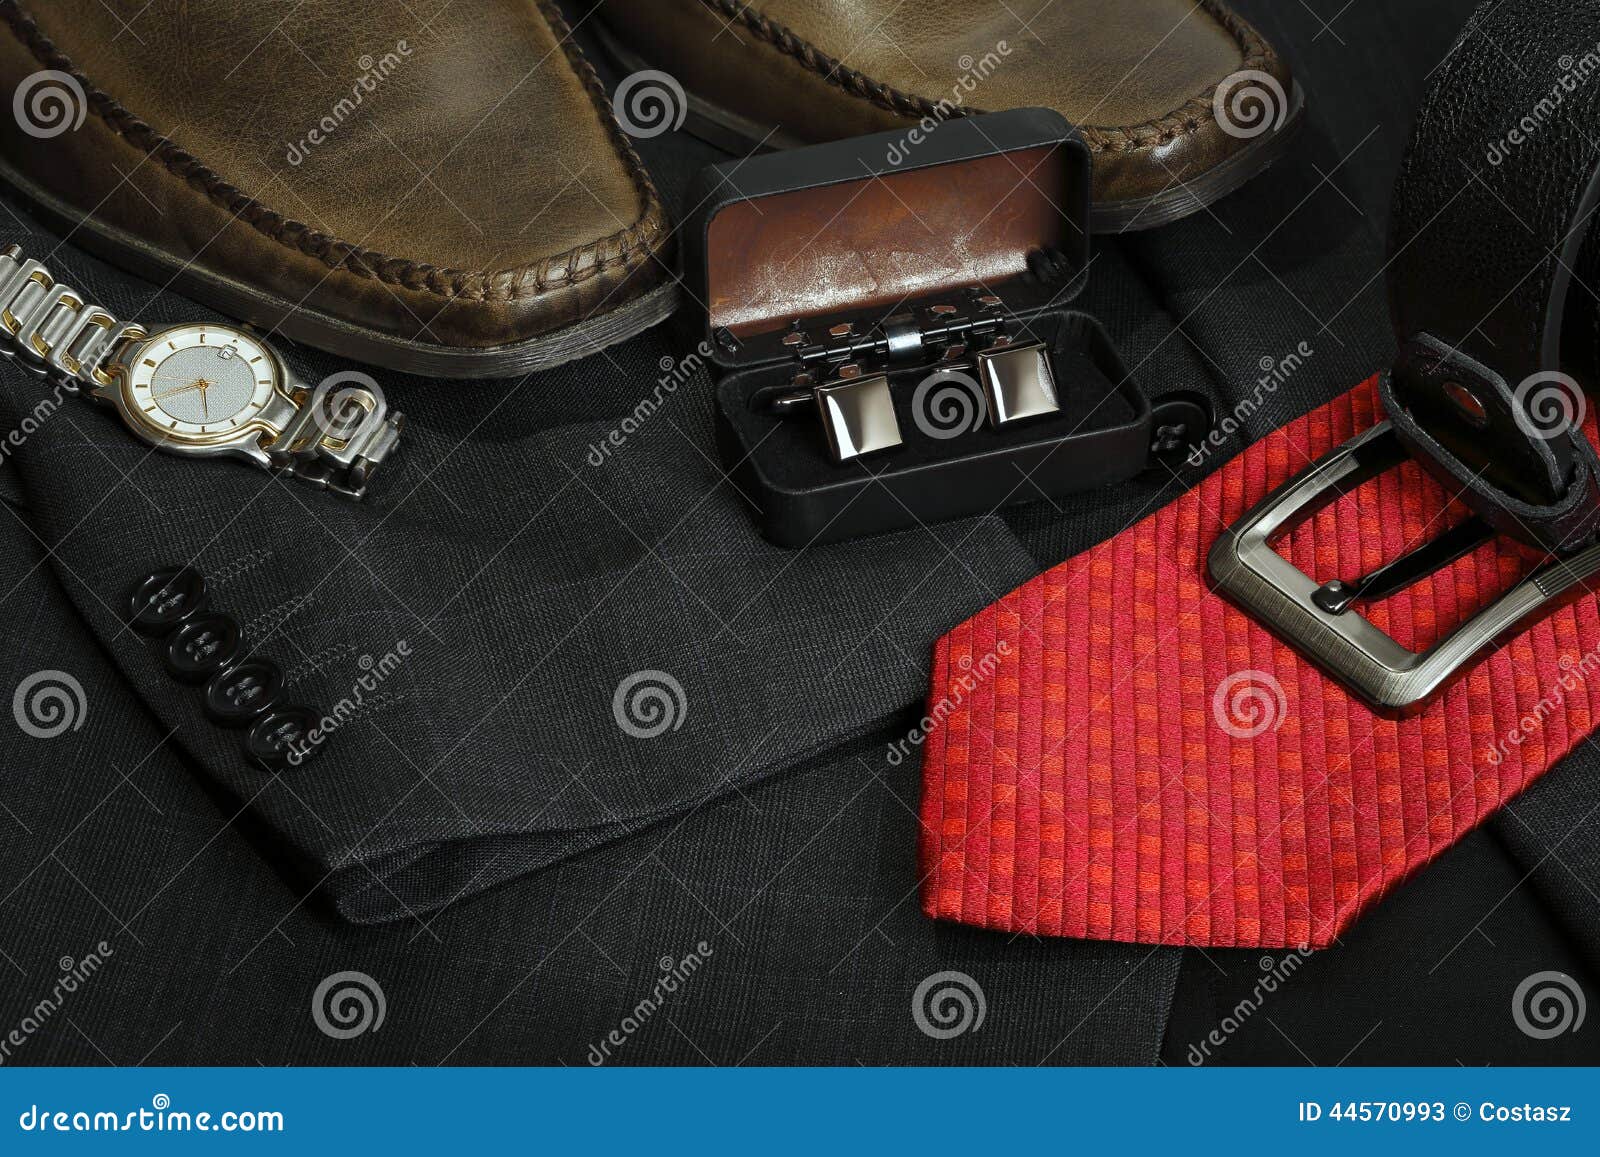 Men s clothing stock image. Image of appearance, apparel - 44570993